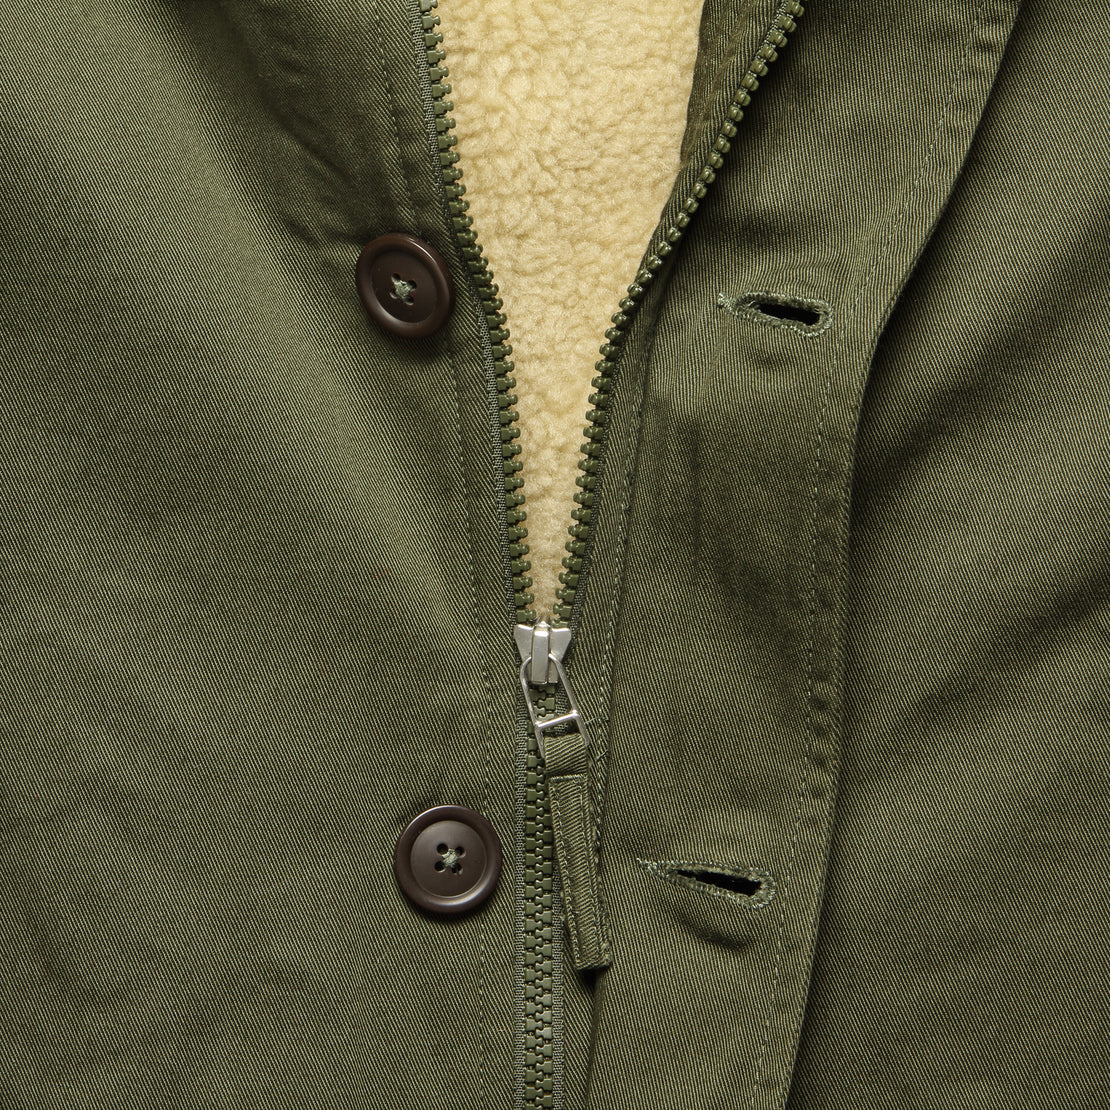 N1 Jacket - Olive - Universal Works - STAG Provisions - Outerwear - Coat / Jacket